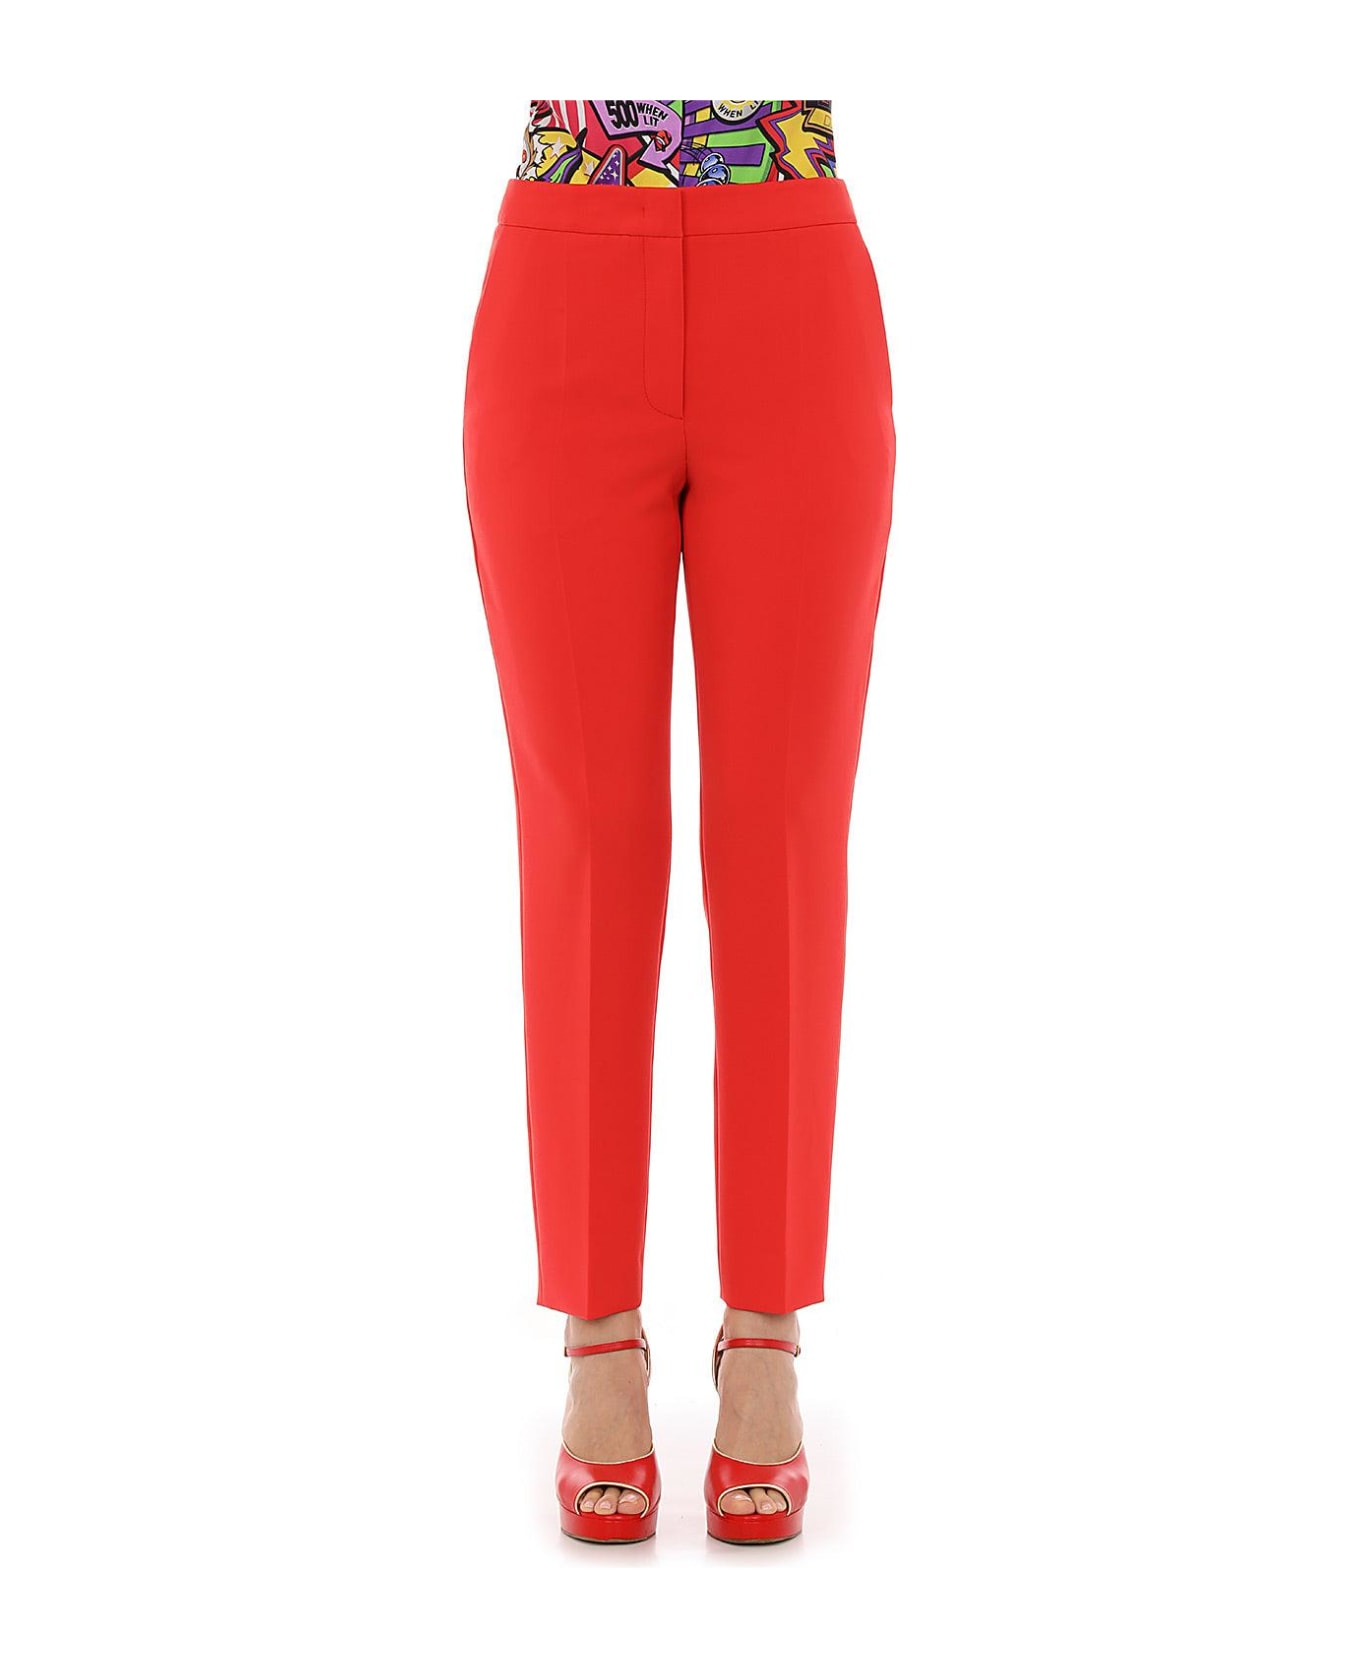 Moschino Mid-rise Tailored Cropped Pants Moschino - RED